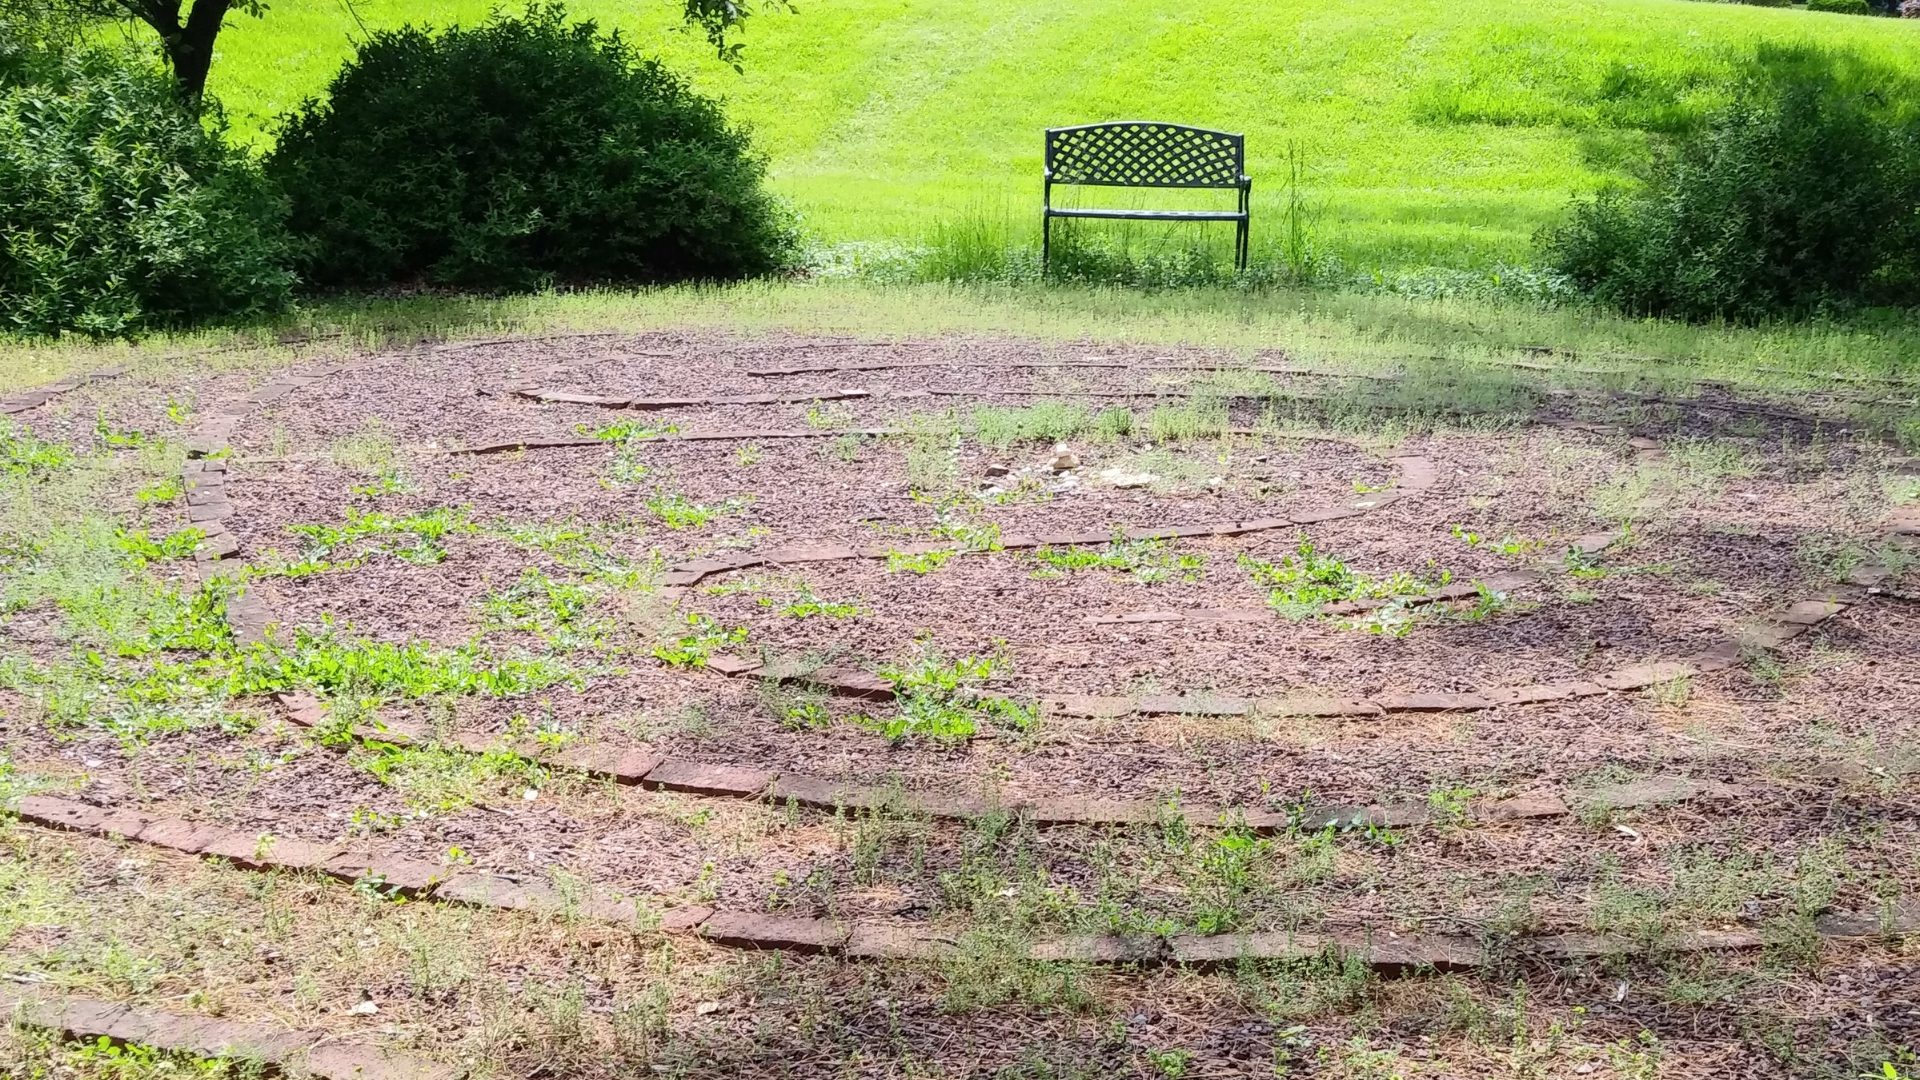 A bench in the middle of an empty field.